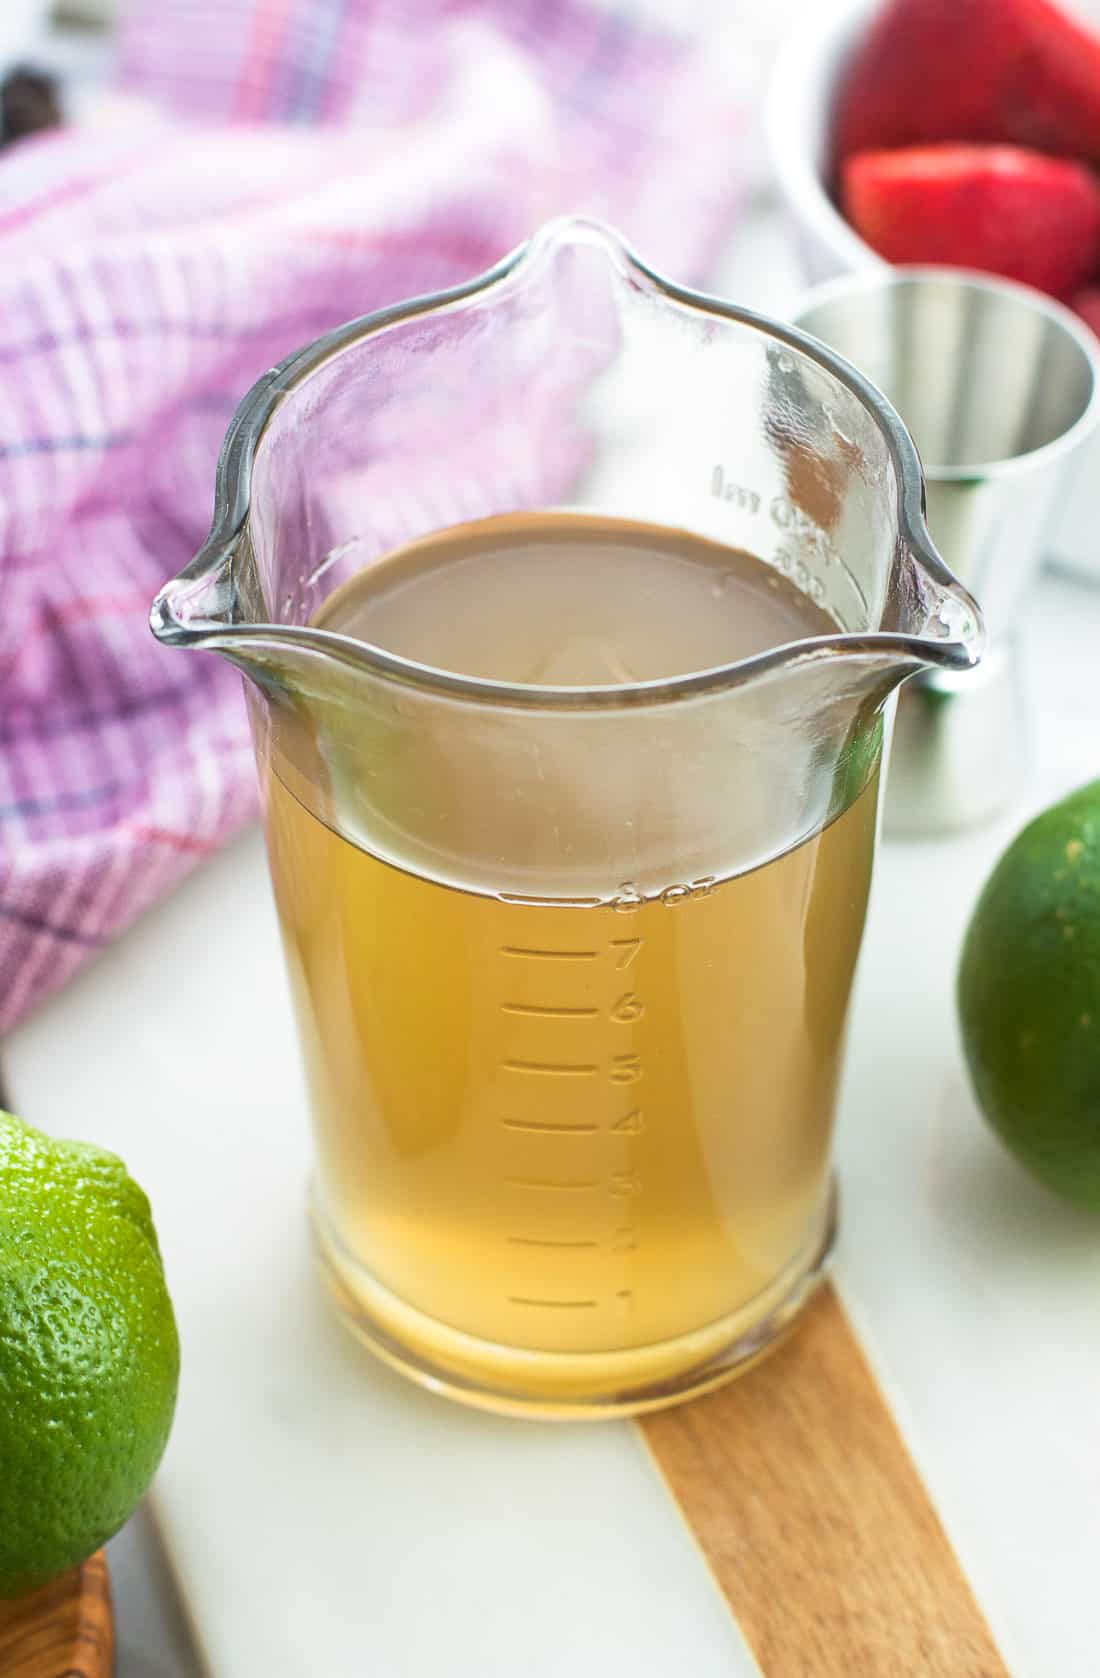 One cup of ginger simple syrup in a glass measuring cup